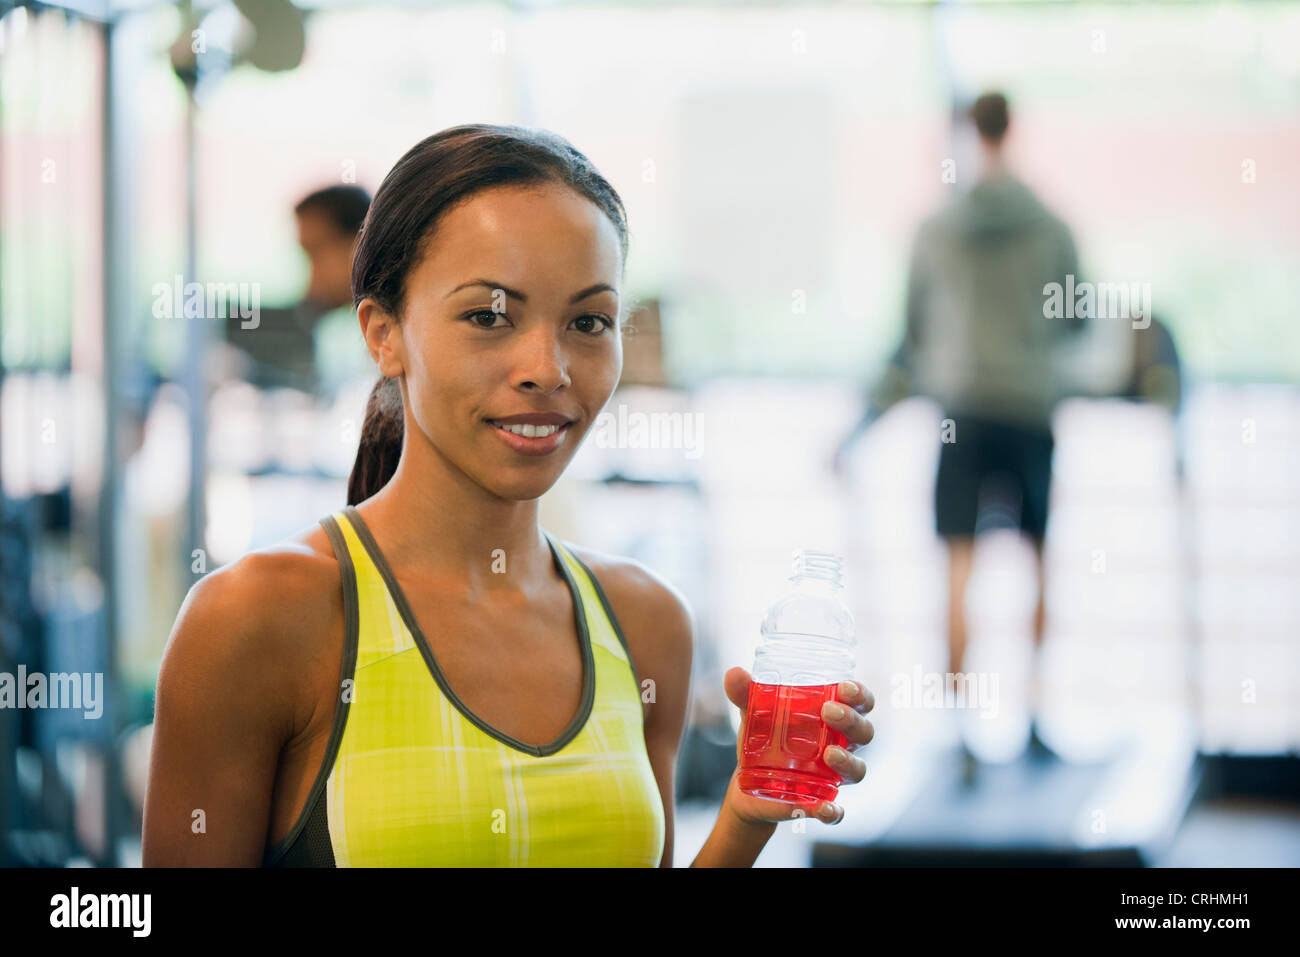 Young woman holding sports drink bottle Stock Photo